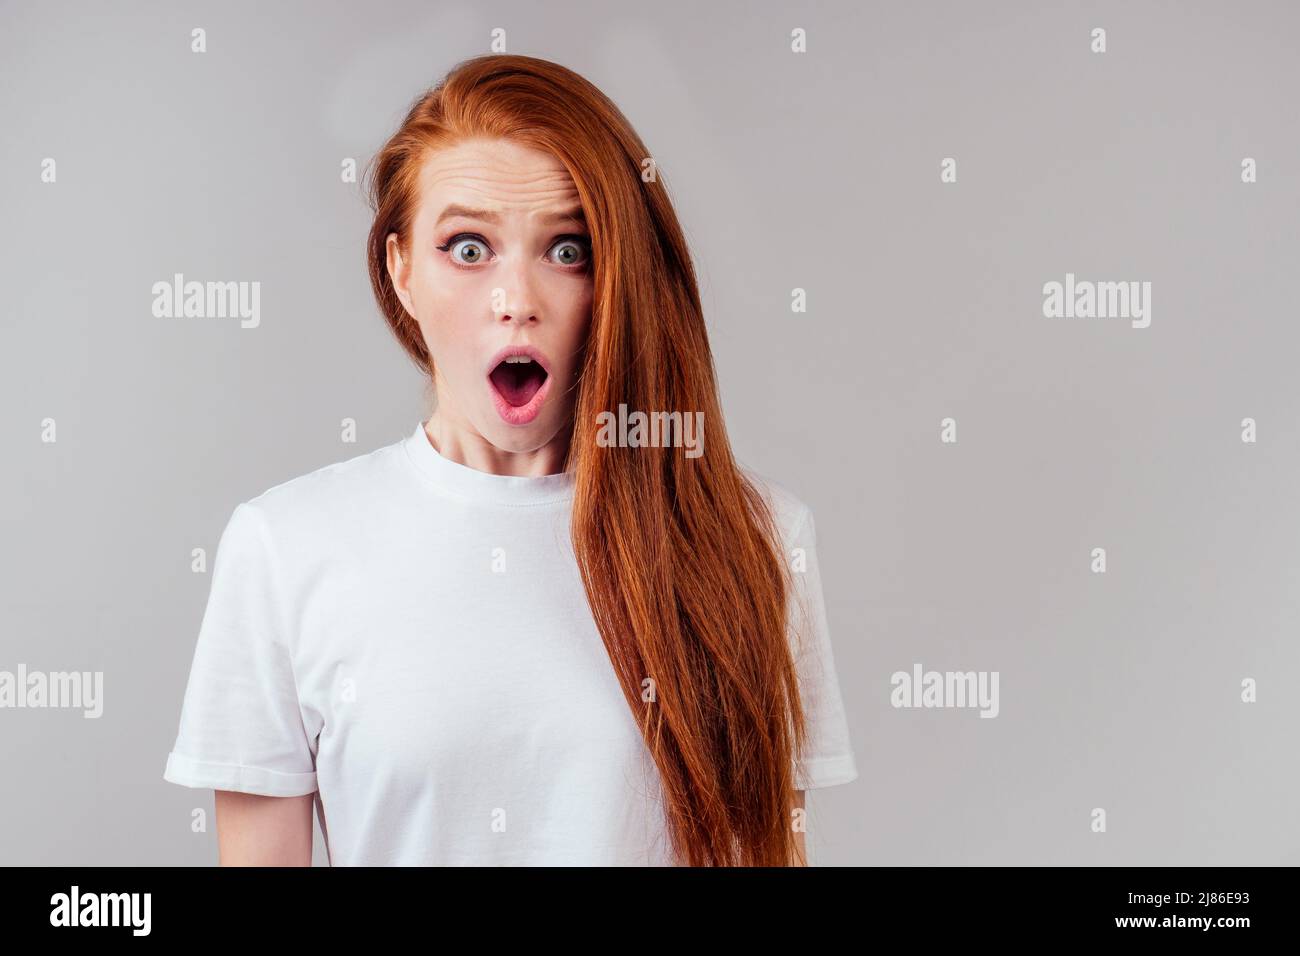 redhair ginger woman feeling unhappy love or beak up with boyfriend concept Stock Photo